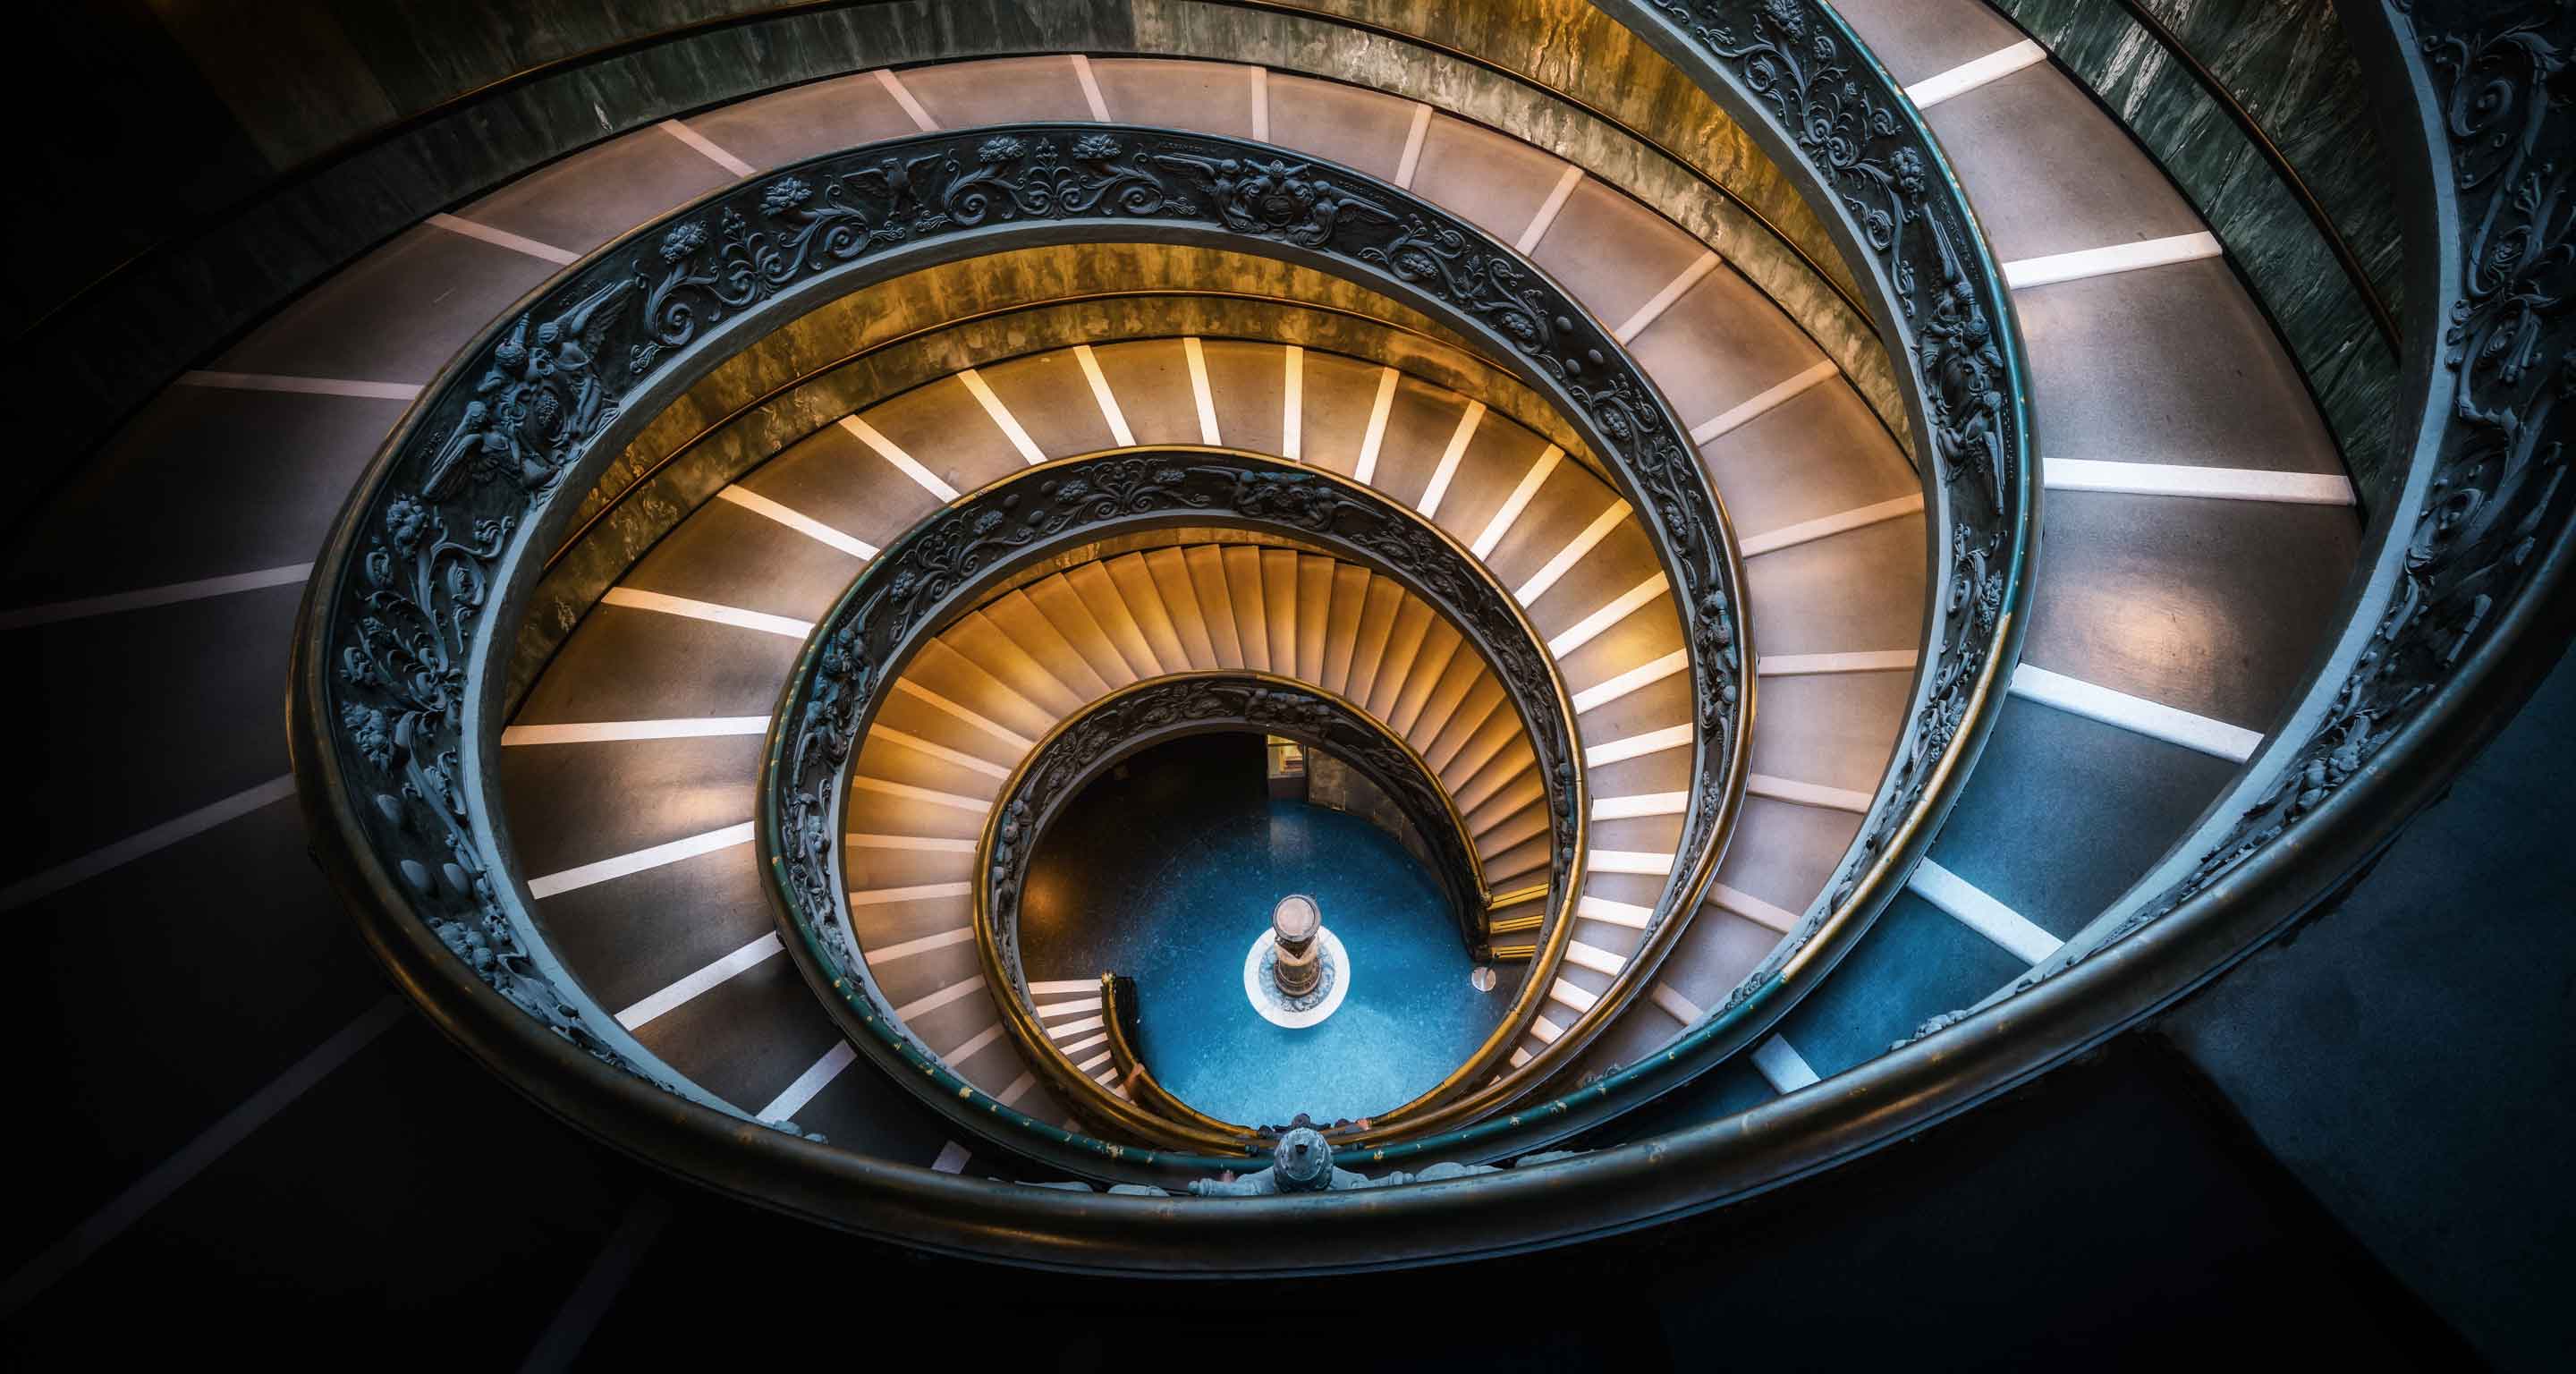 The Bramante Staircase in Rome.